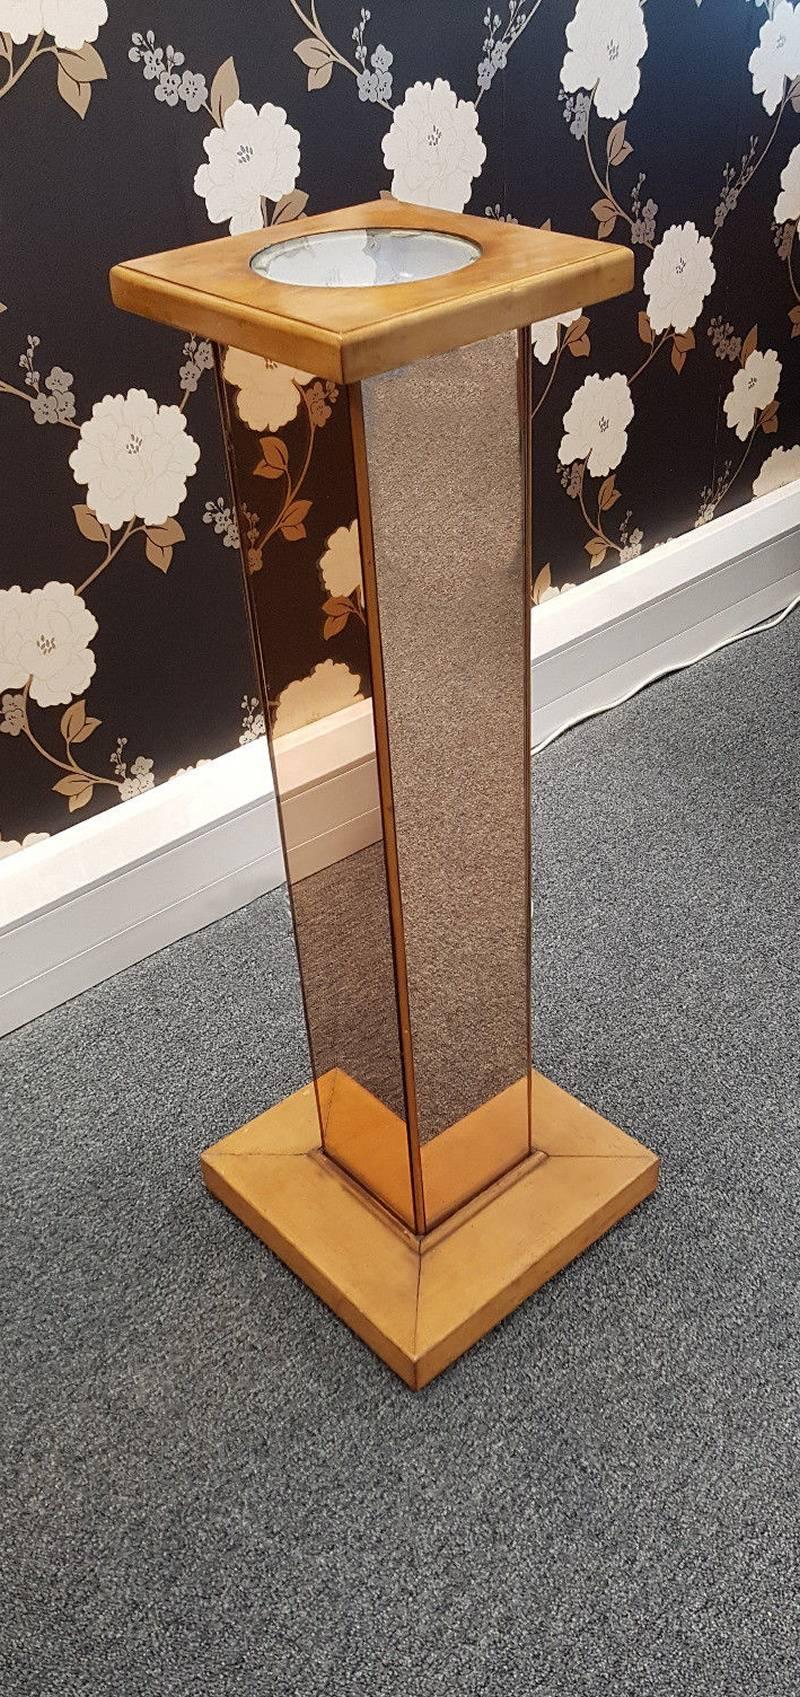 Glamorous and Rare English Art Deco Pink Mirror Floor Lamp In Good Condition For Sale In Devon, England